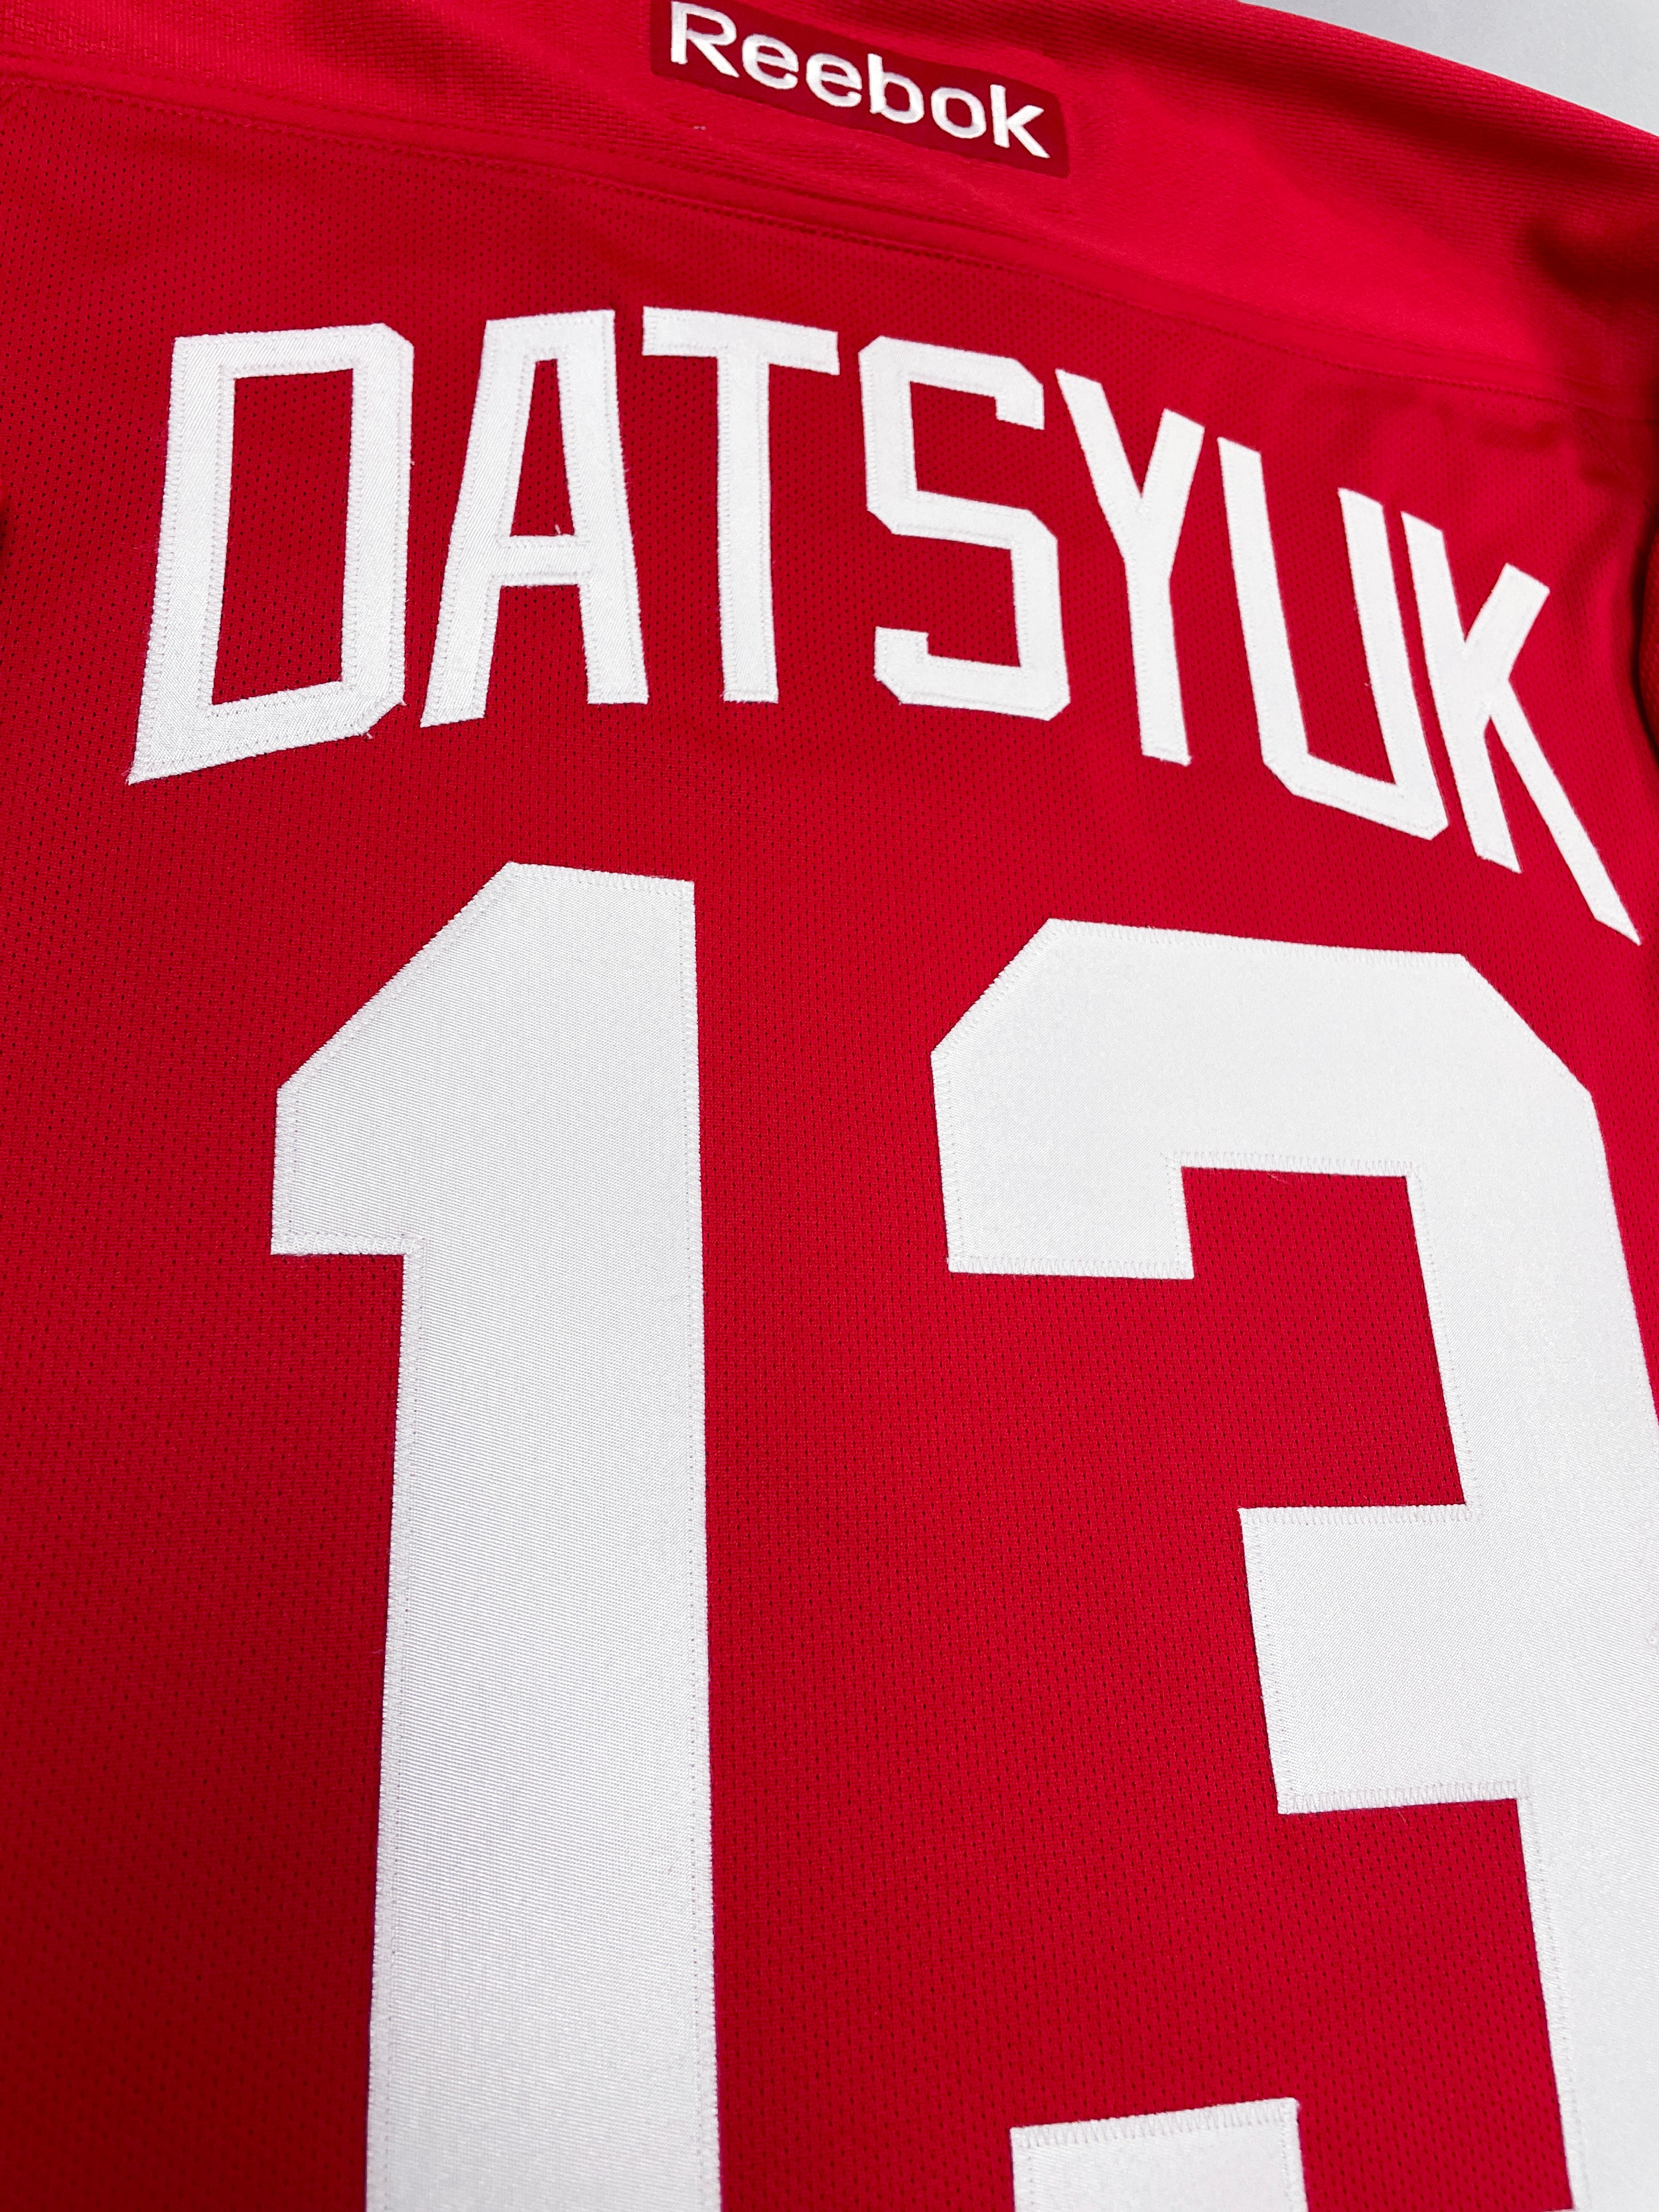 Pavel Datsyuk - Detroit Red Wings - 2005-07 Reebok Authentic Home Jersey 46  (S)